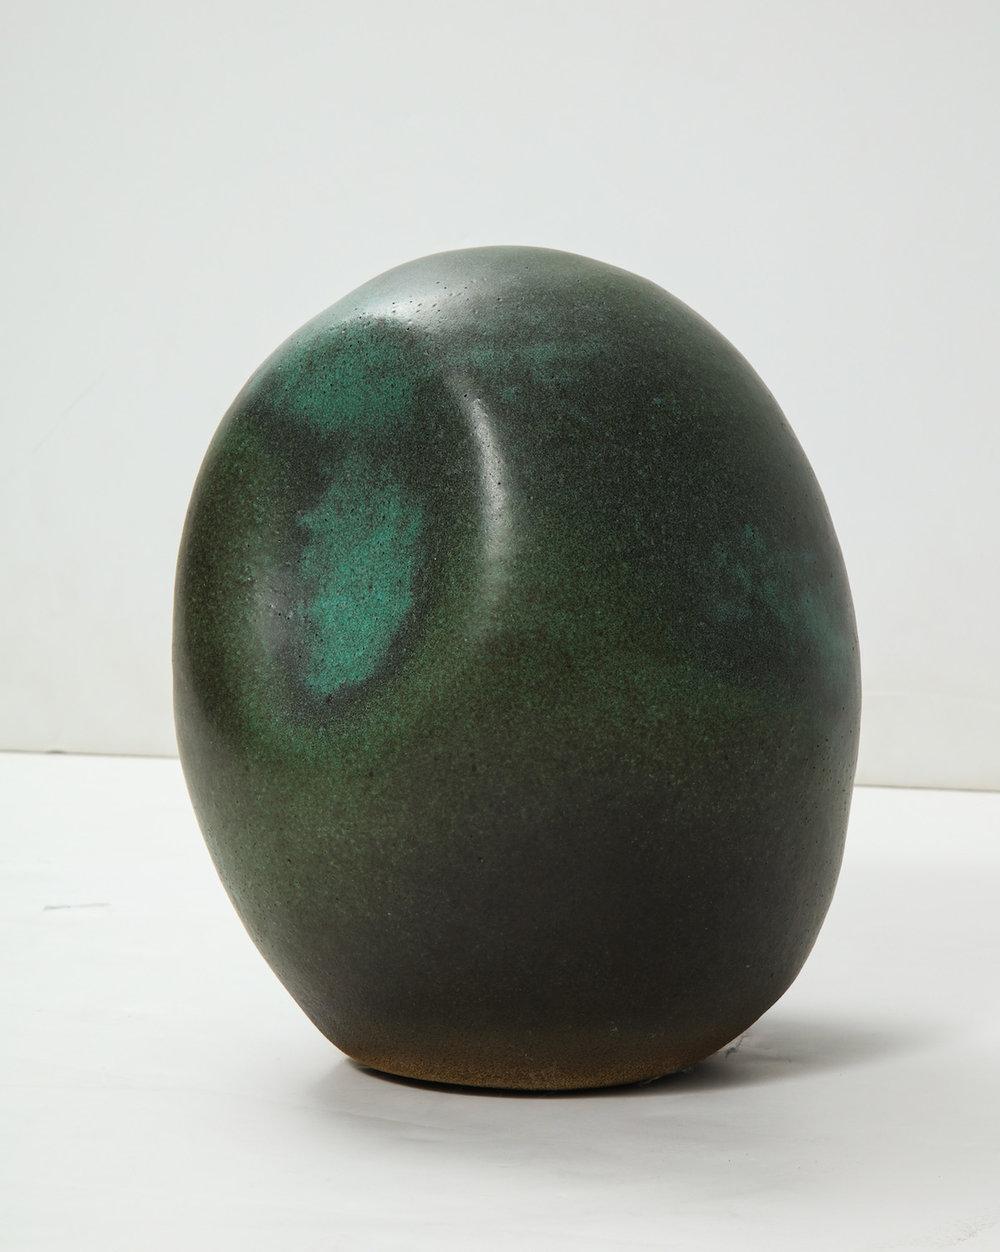 Wheel-thrown egg form with hand molded indentations, green glazes. Artist-signed to underside.